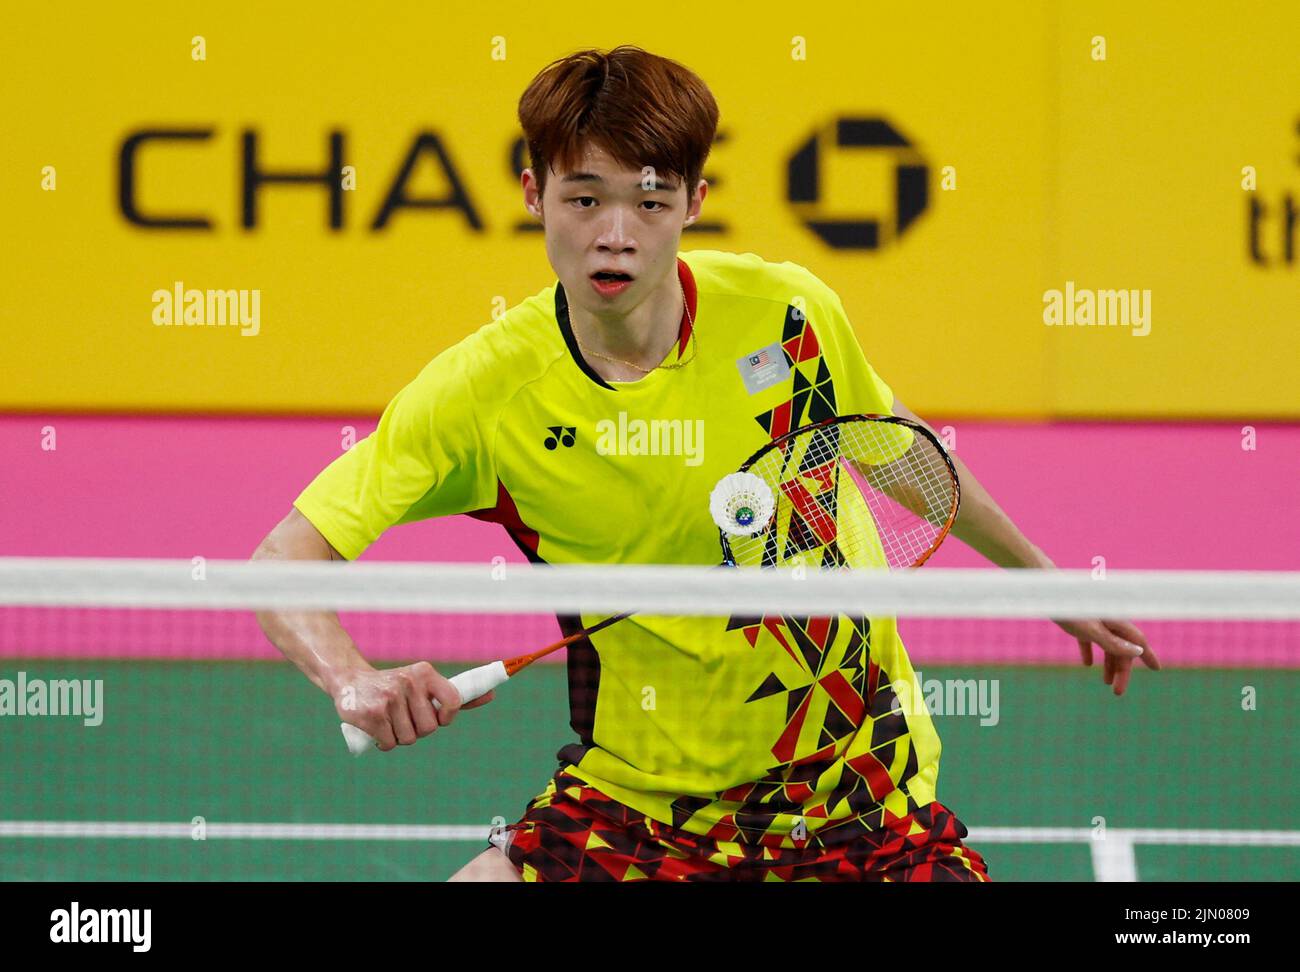 Commonwealth Games - Badminton - Men's Singles - Gold Medal Match - The NEC Hall 5, Birmingham, Britain - August 8, 2022 Malaysia's Tze Yong Ng in action REUTERS/Jason Cairnduff Stock Photo